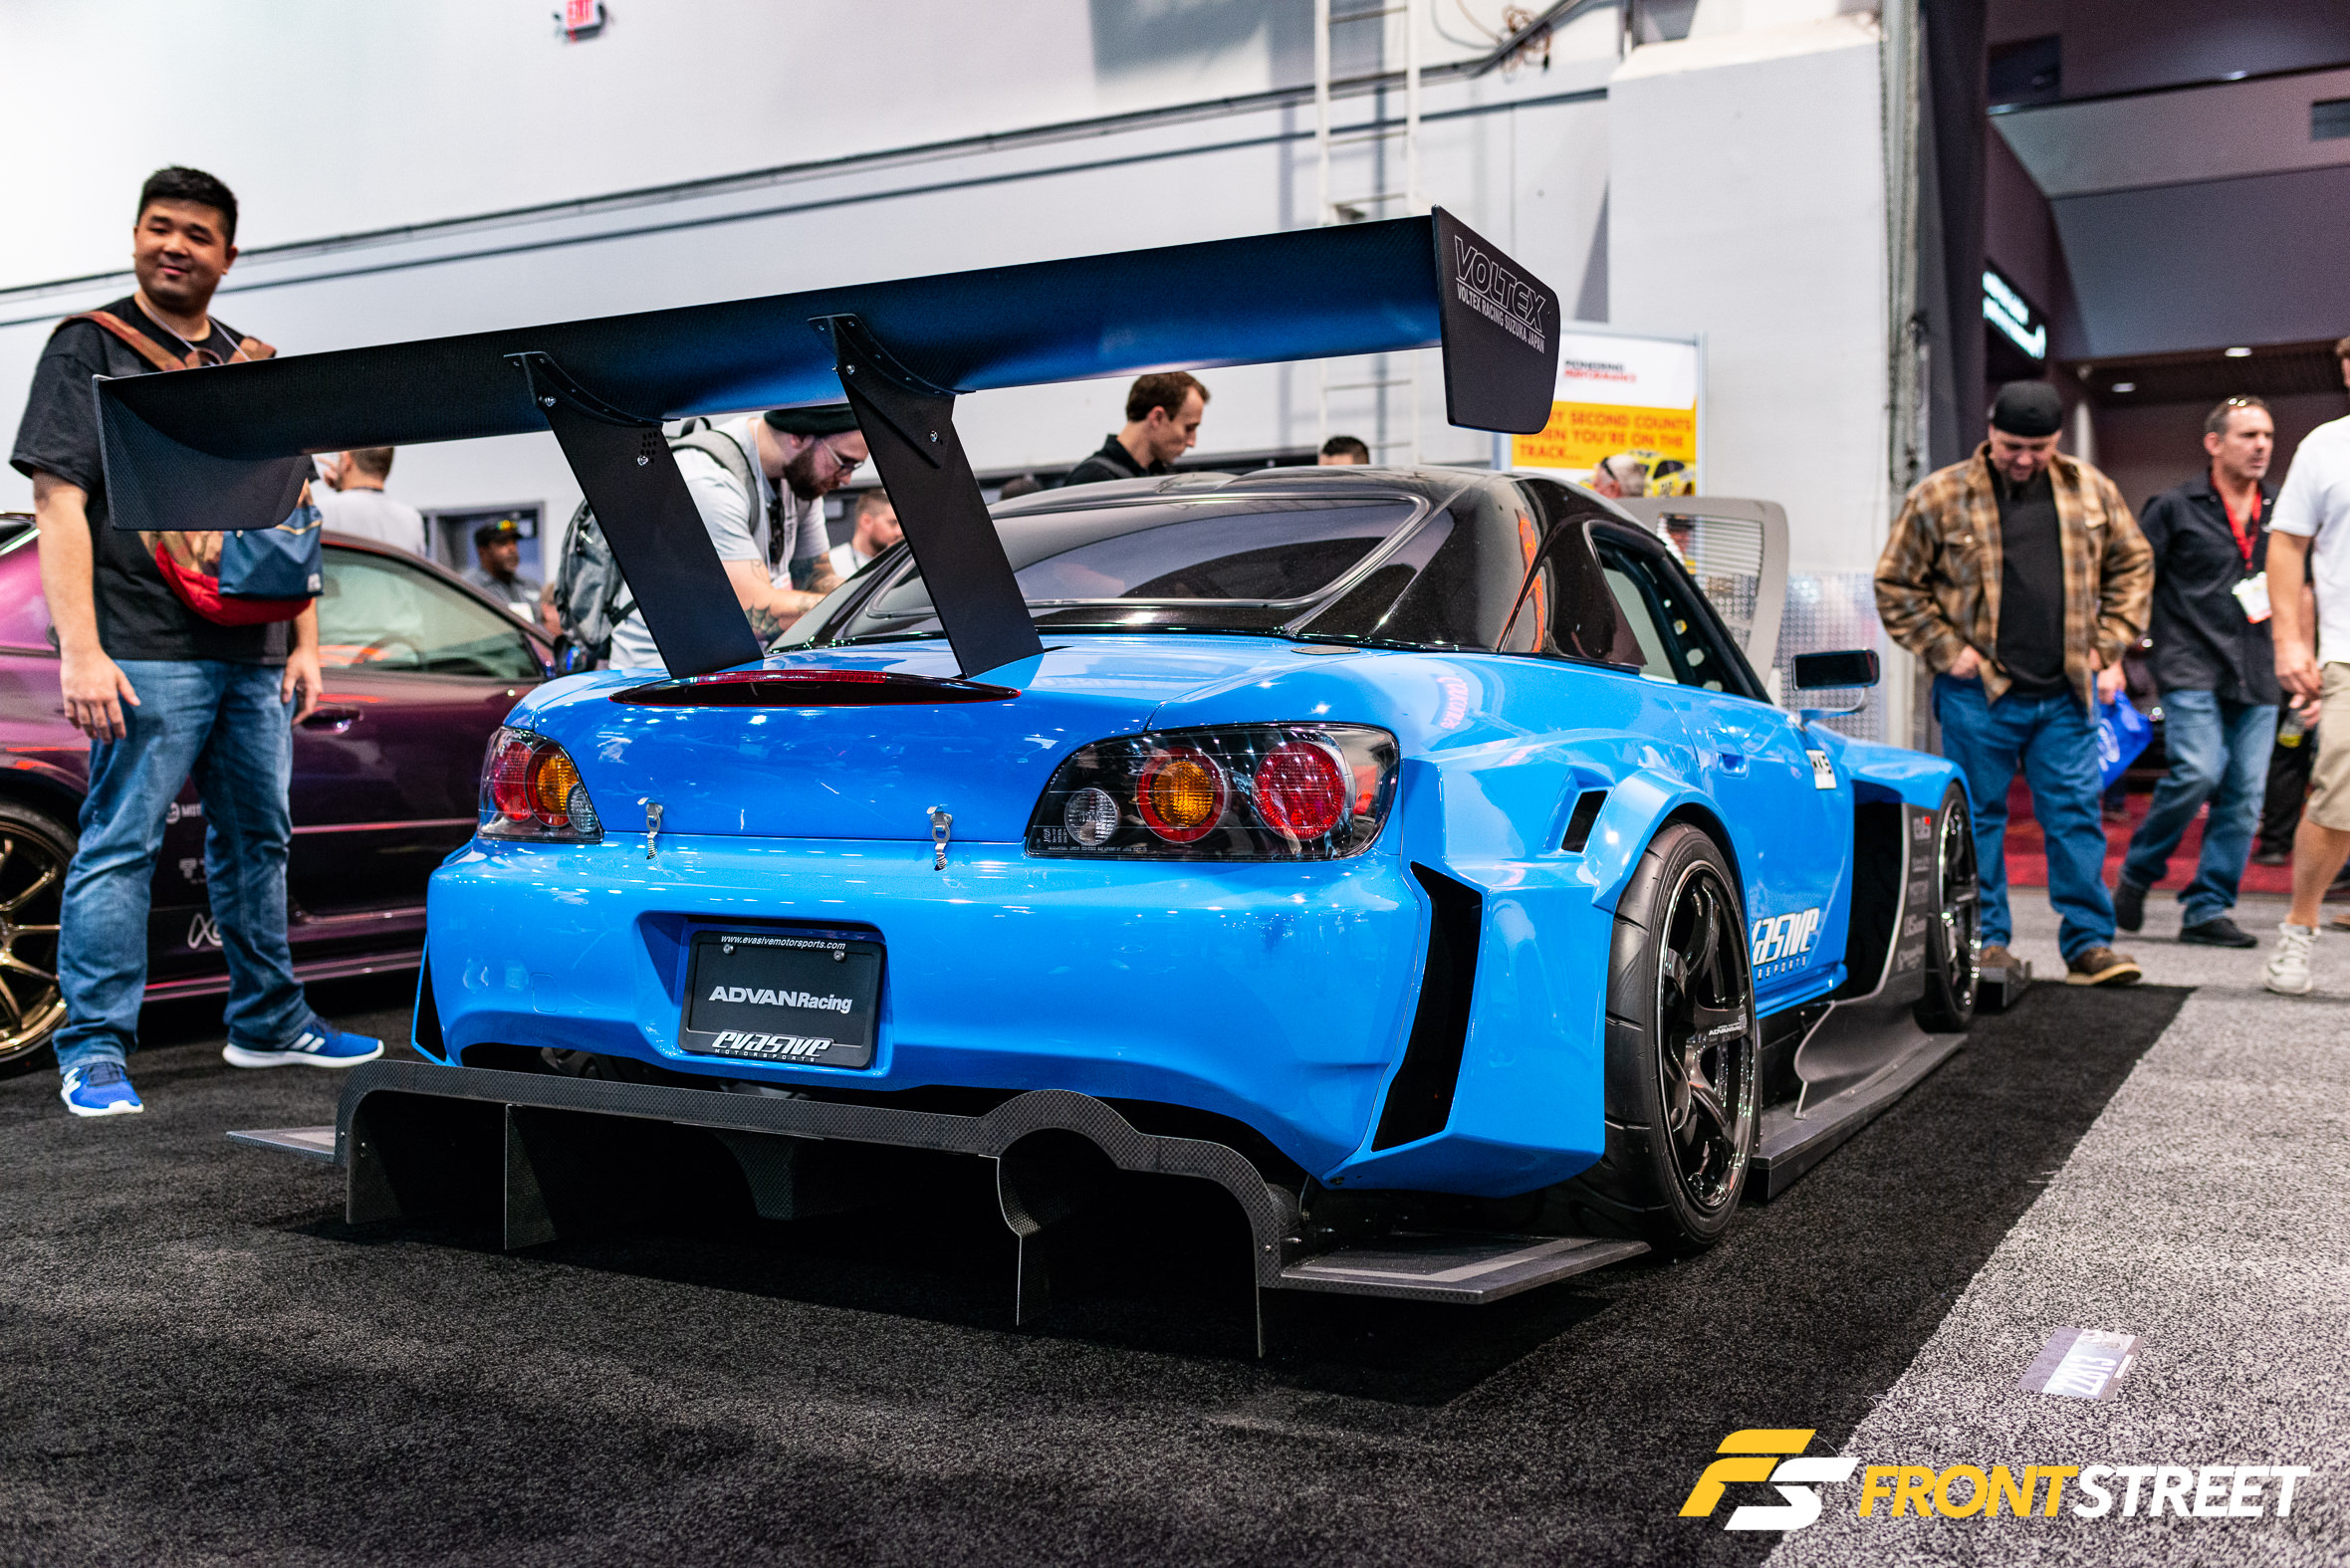 From The Archives: A Collection Of The Wildest S2000s We've Published